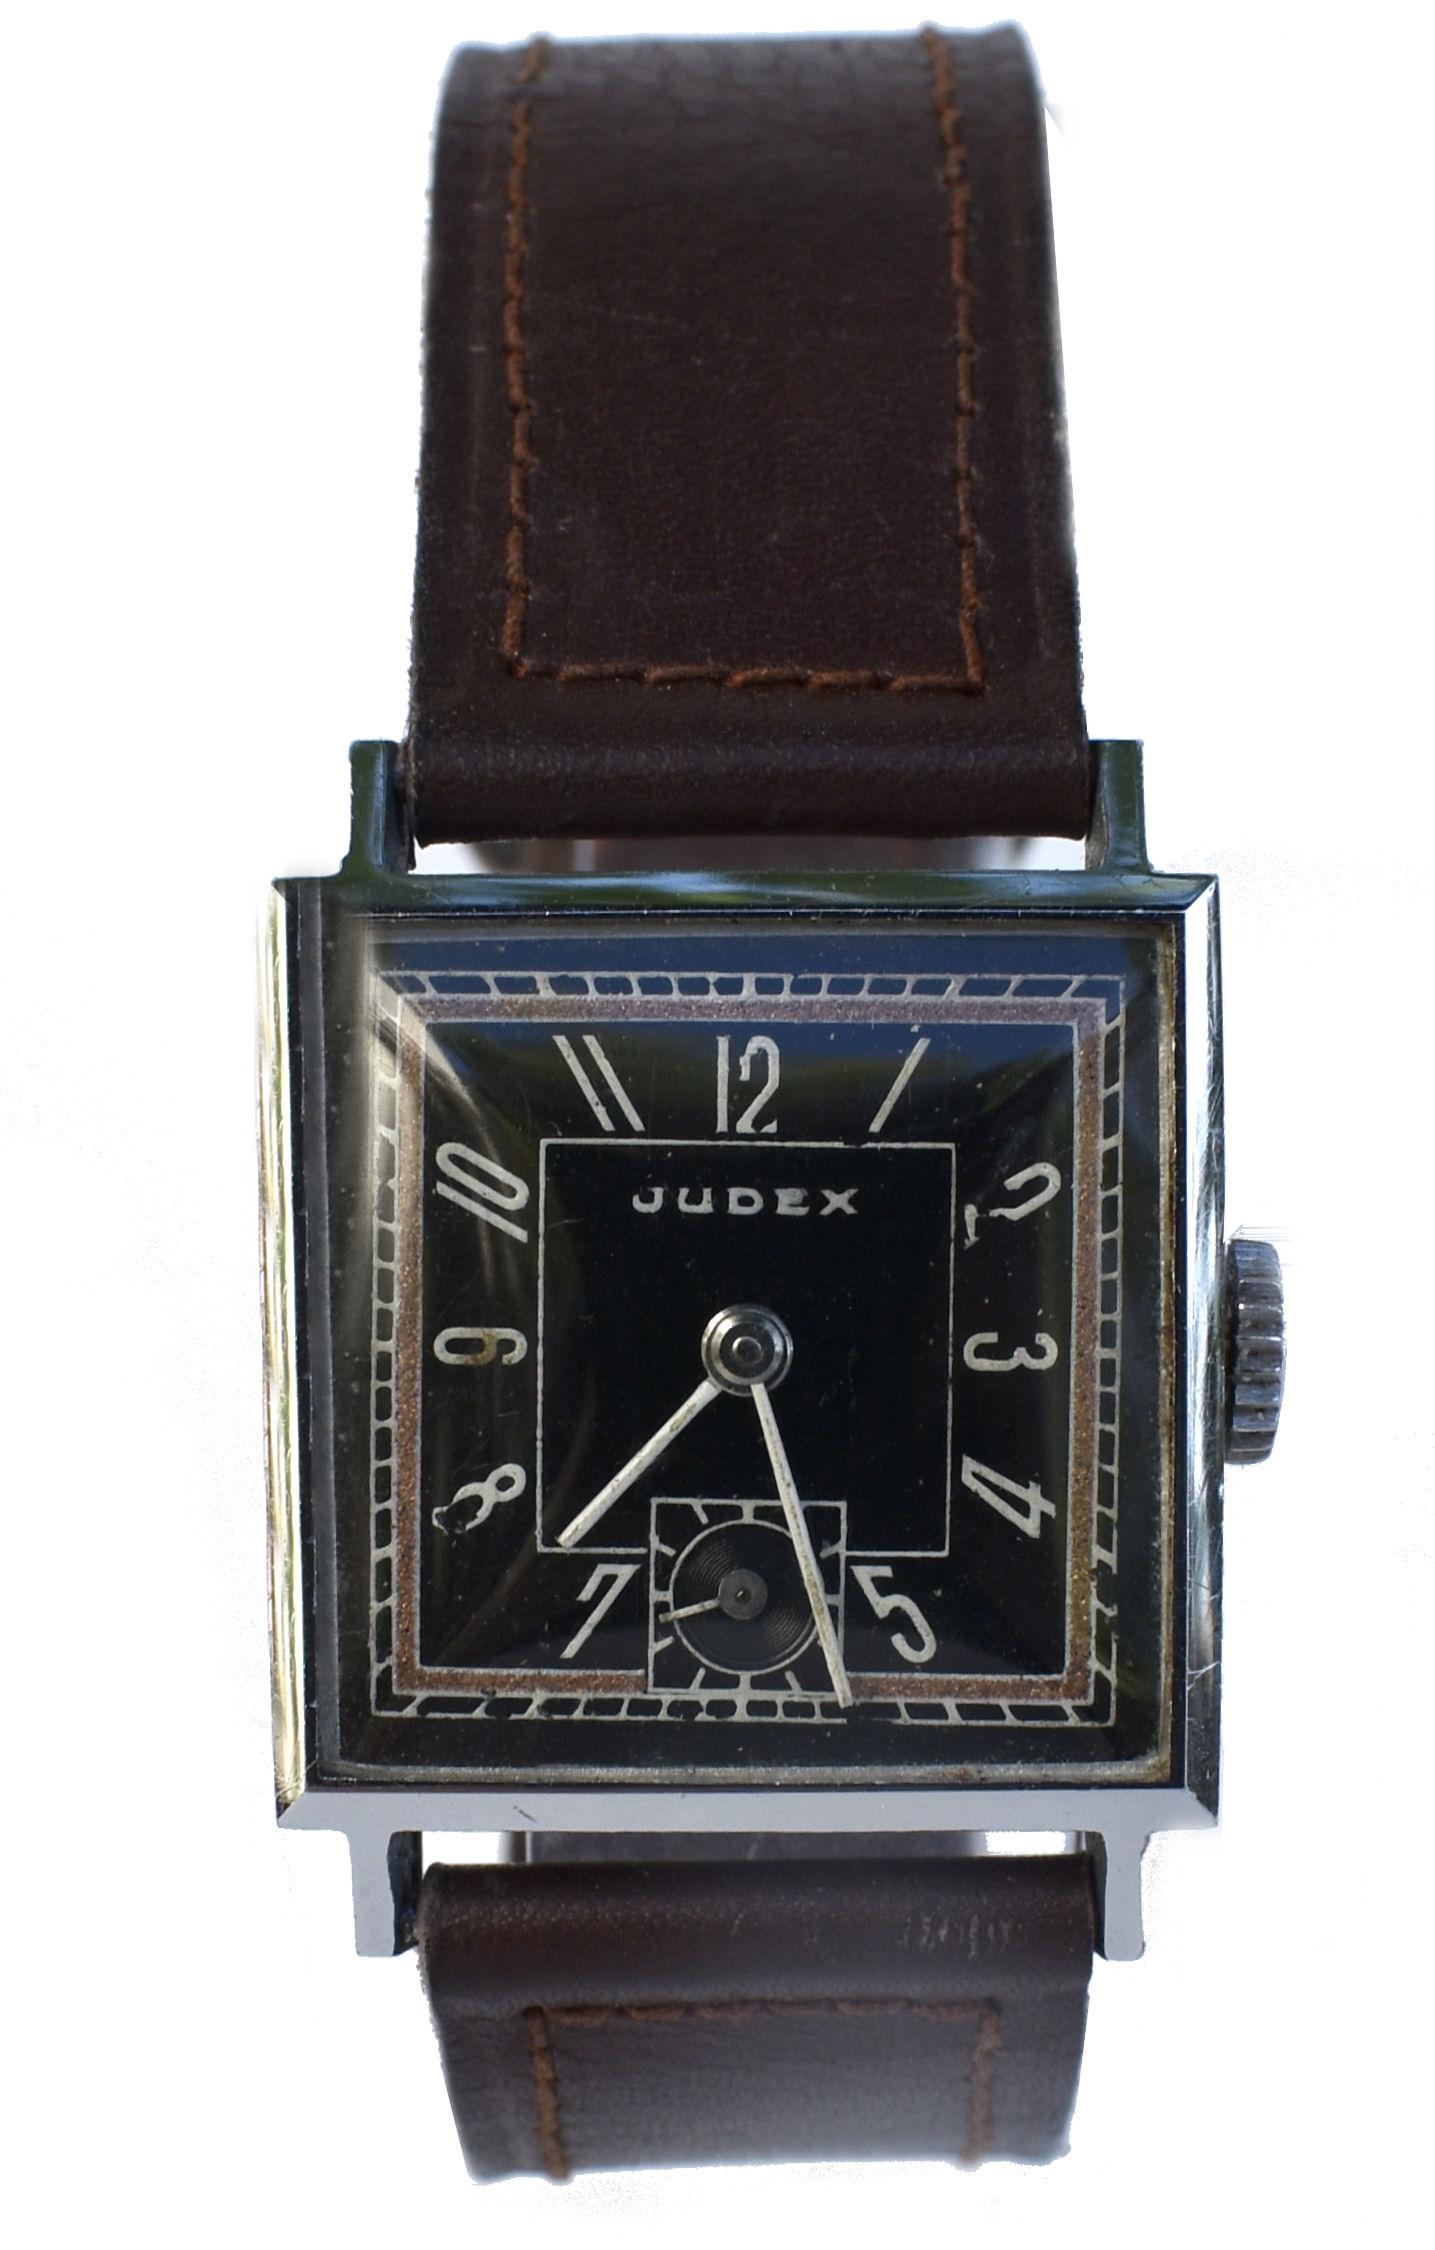 Art Deco Gents Manual Wristwatch by French Watchmakers Judex, c1930 2